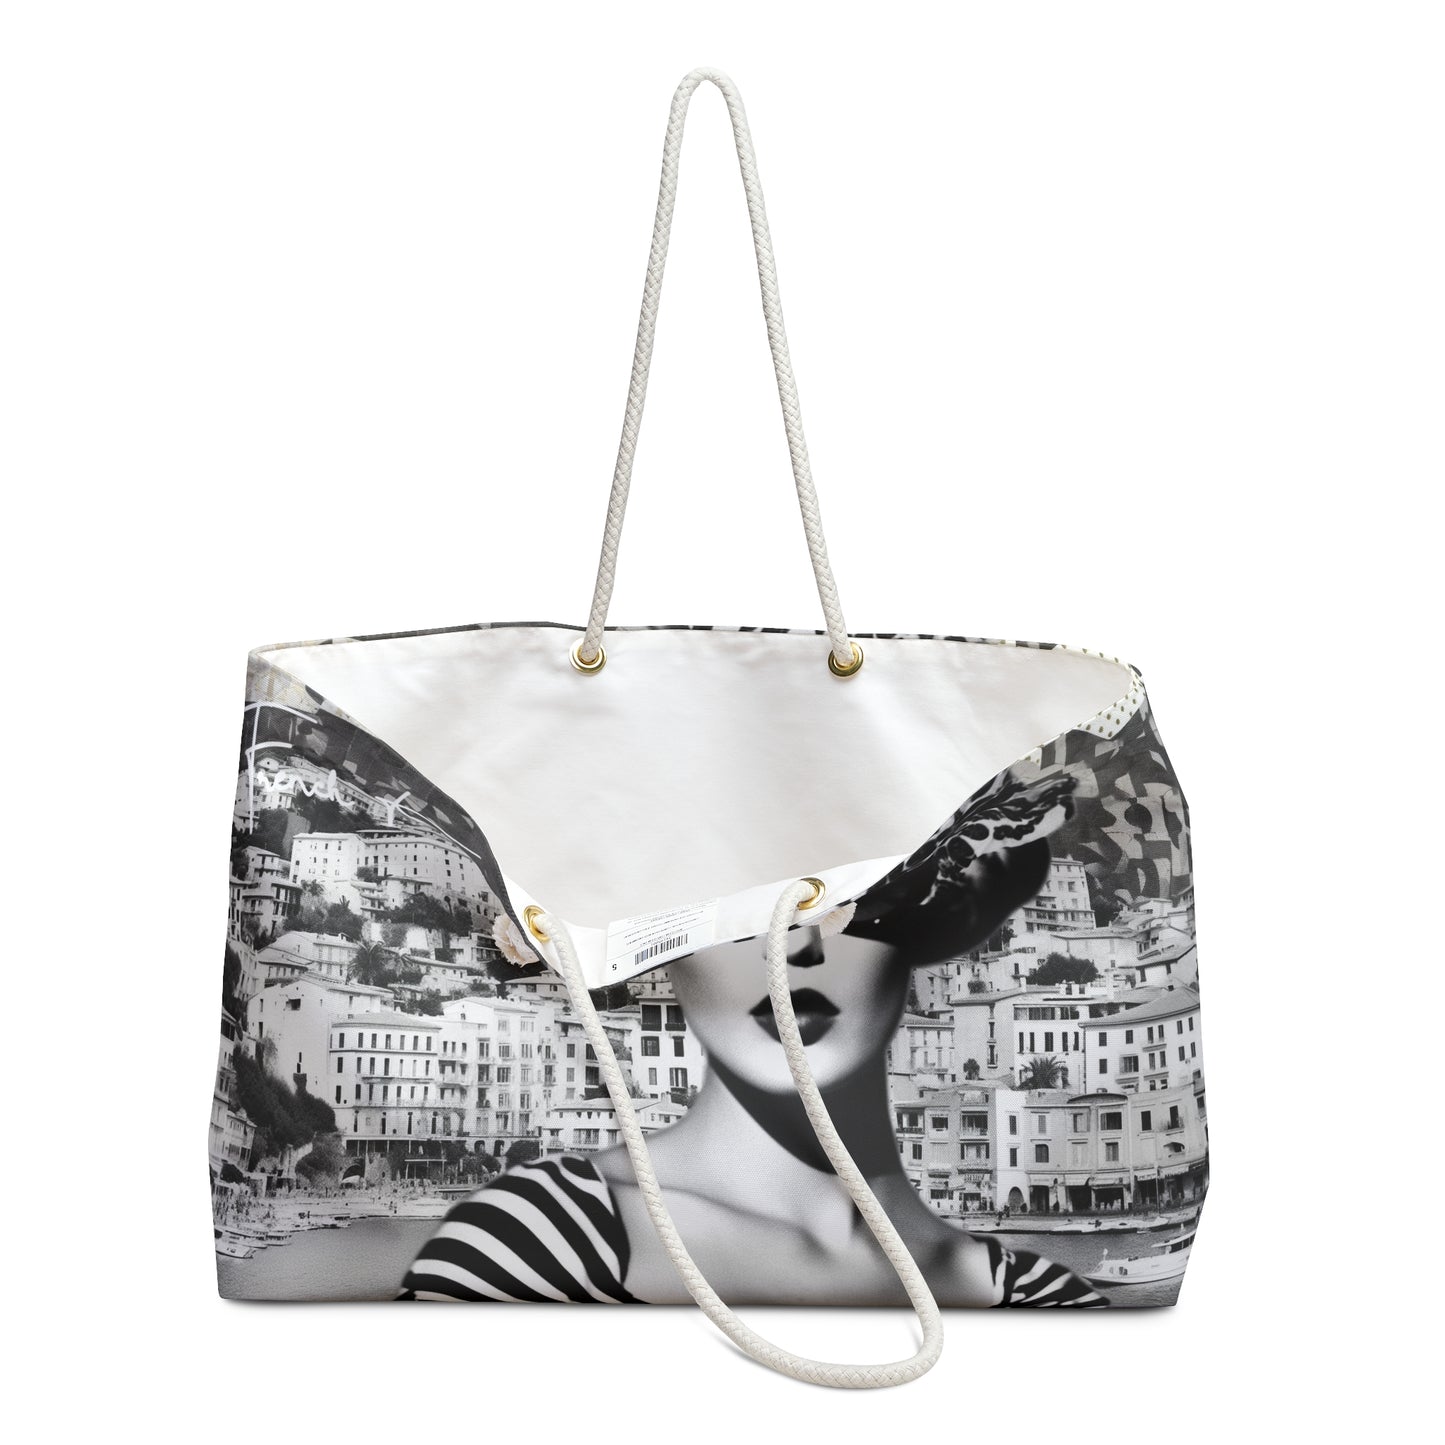 OOH LA LA! Sassy Sexy Chic Weekender Accessory Bag French Kiss Pop Art, Classy, Couture, Travel, Fashion, Beauty gift item